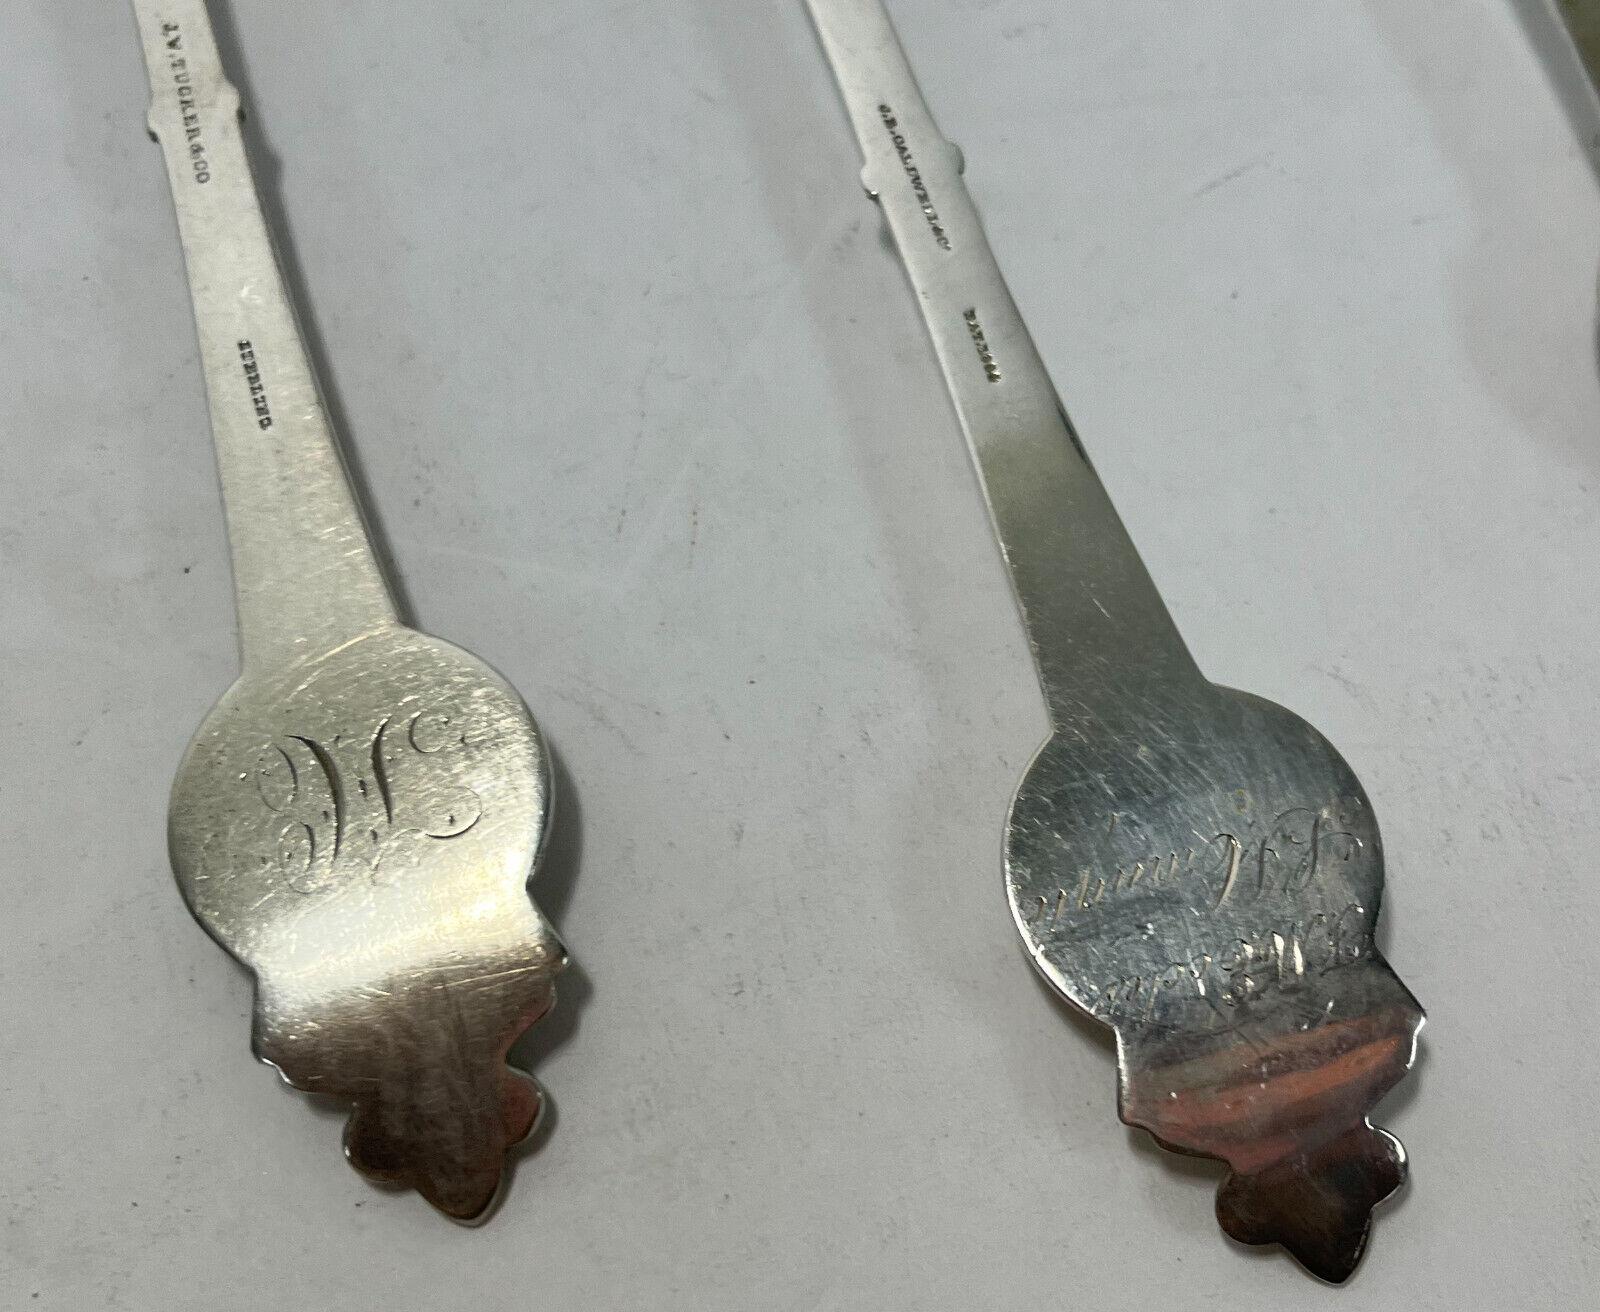  7 Gorham Sterling Silver Medallion 8.5 inch Tablespoons, Late 19th Century  2